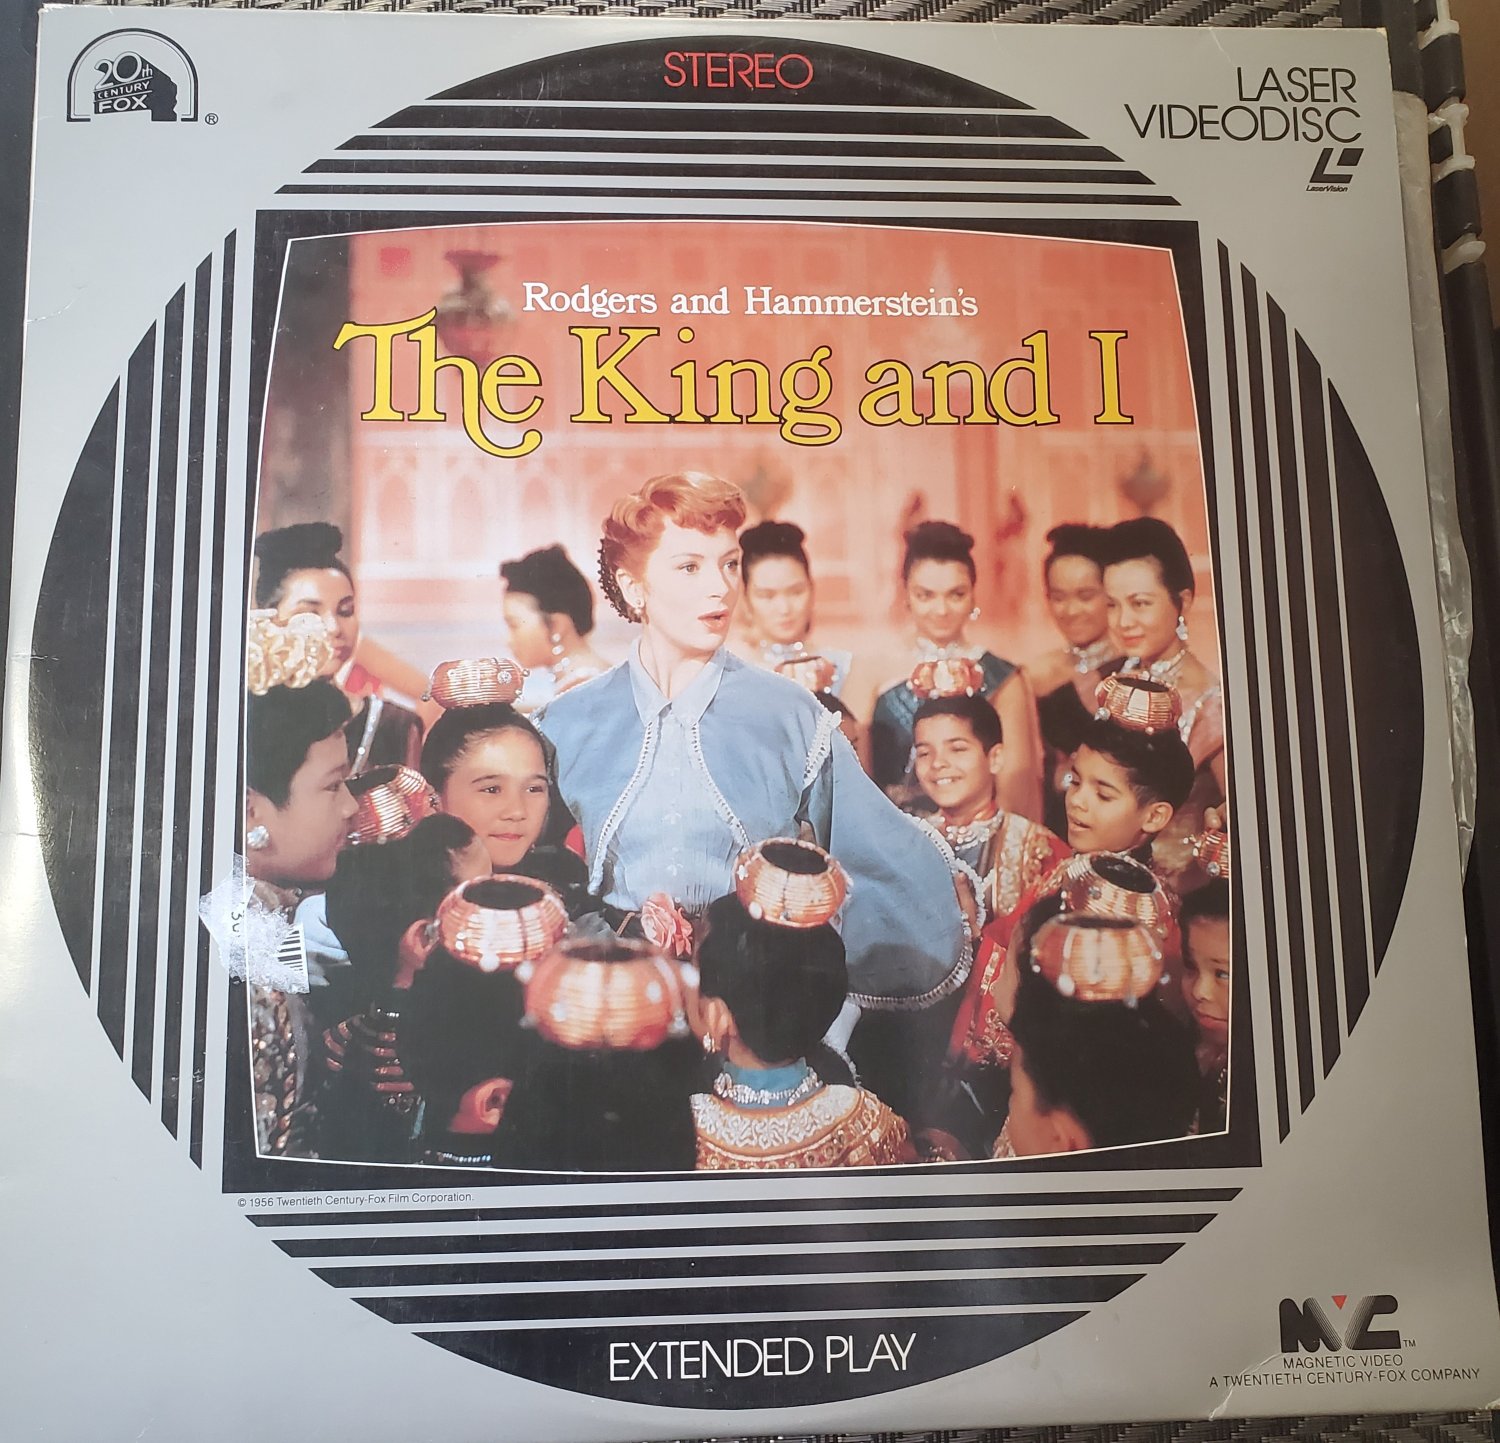 Video Laserdisc The King And I Yul Brynner Rita Moreno Rodgers and Hammerstein